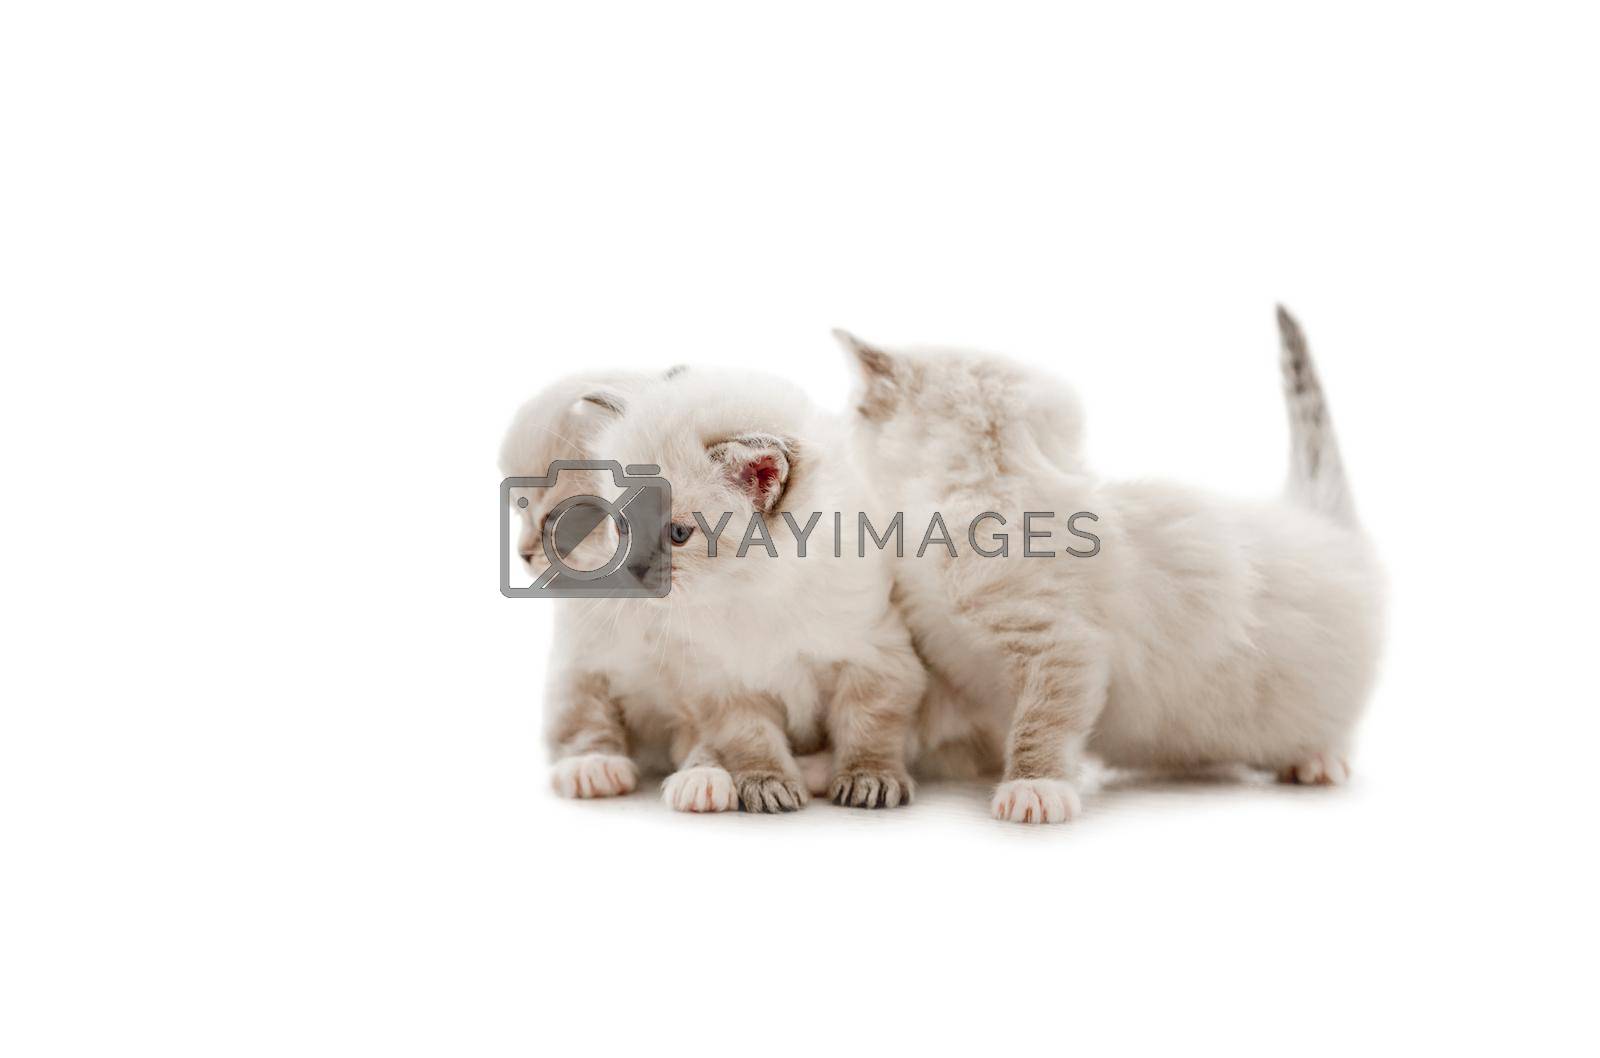 Three adorable fluffy ragdoll kittens isolated on white background. Cute purebred fluffy kitty cats together. Lovely little feline pets